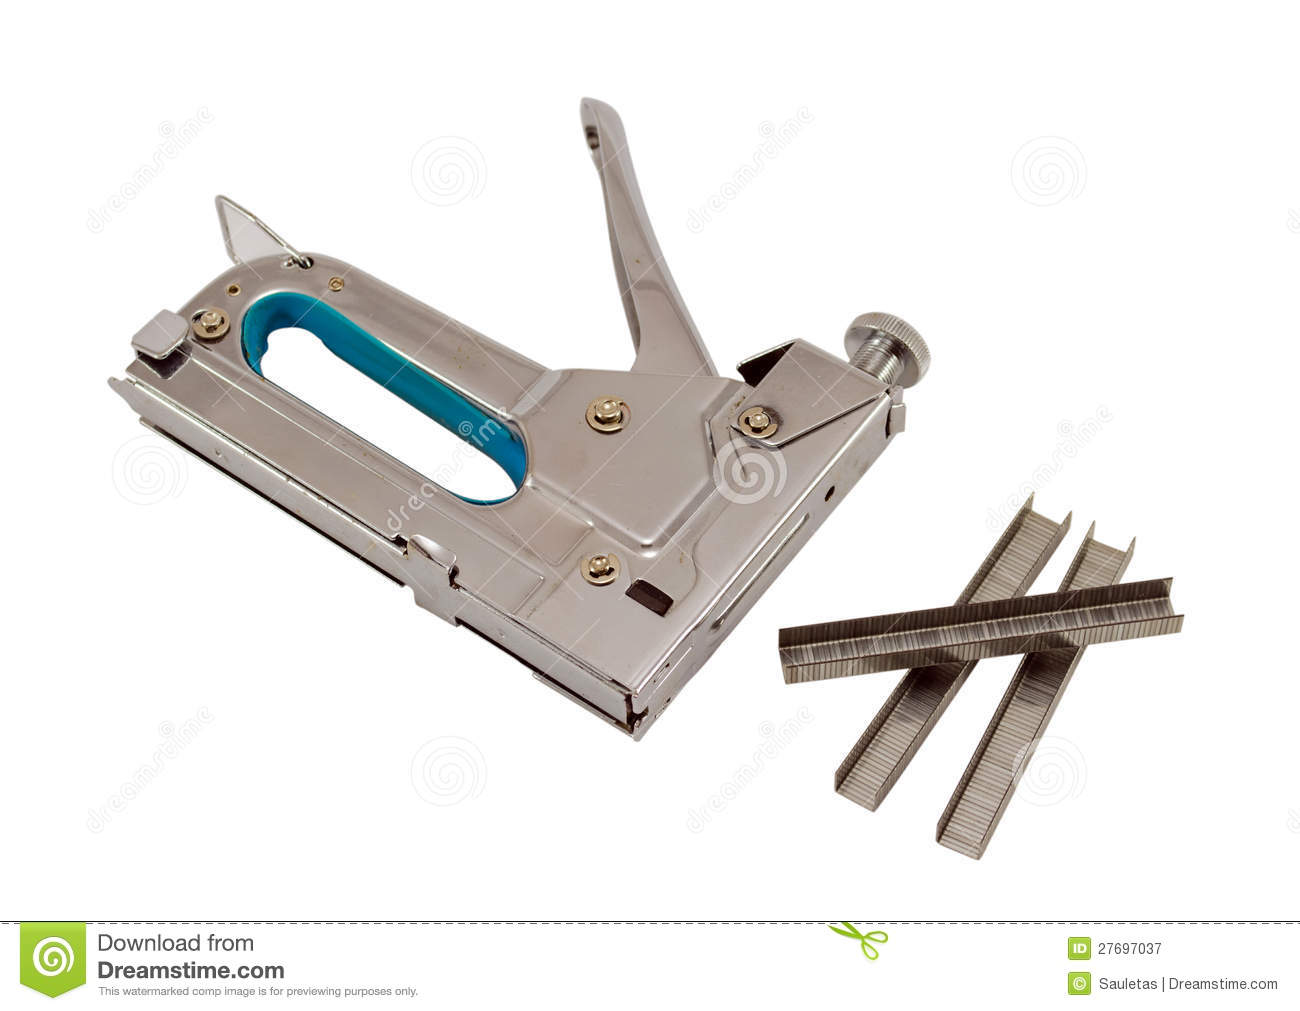     Free Stock Photography  Stapler Pin Clip Tool Fasten Material On White